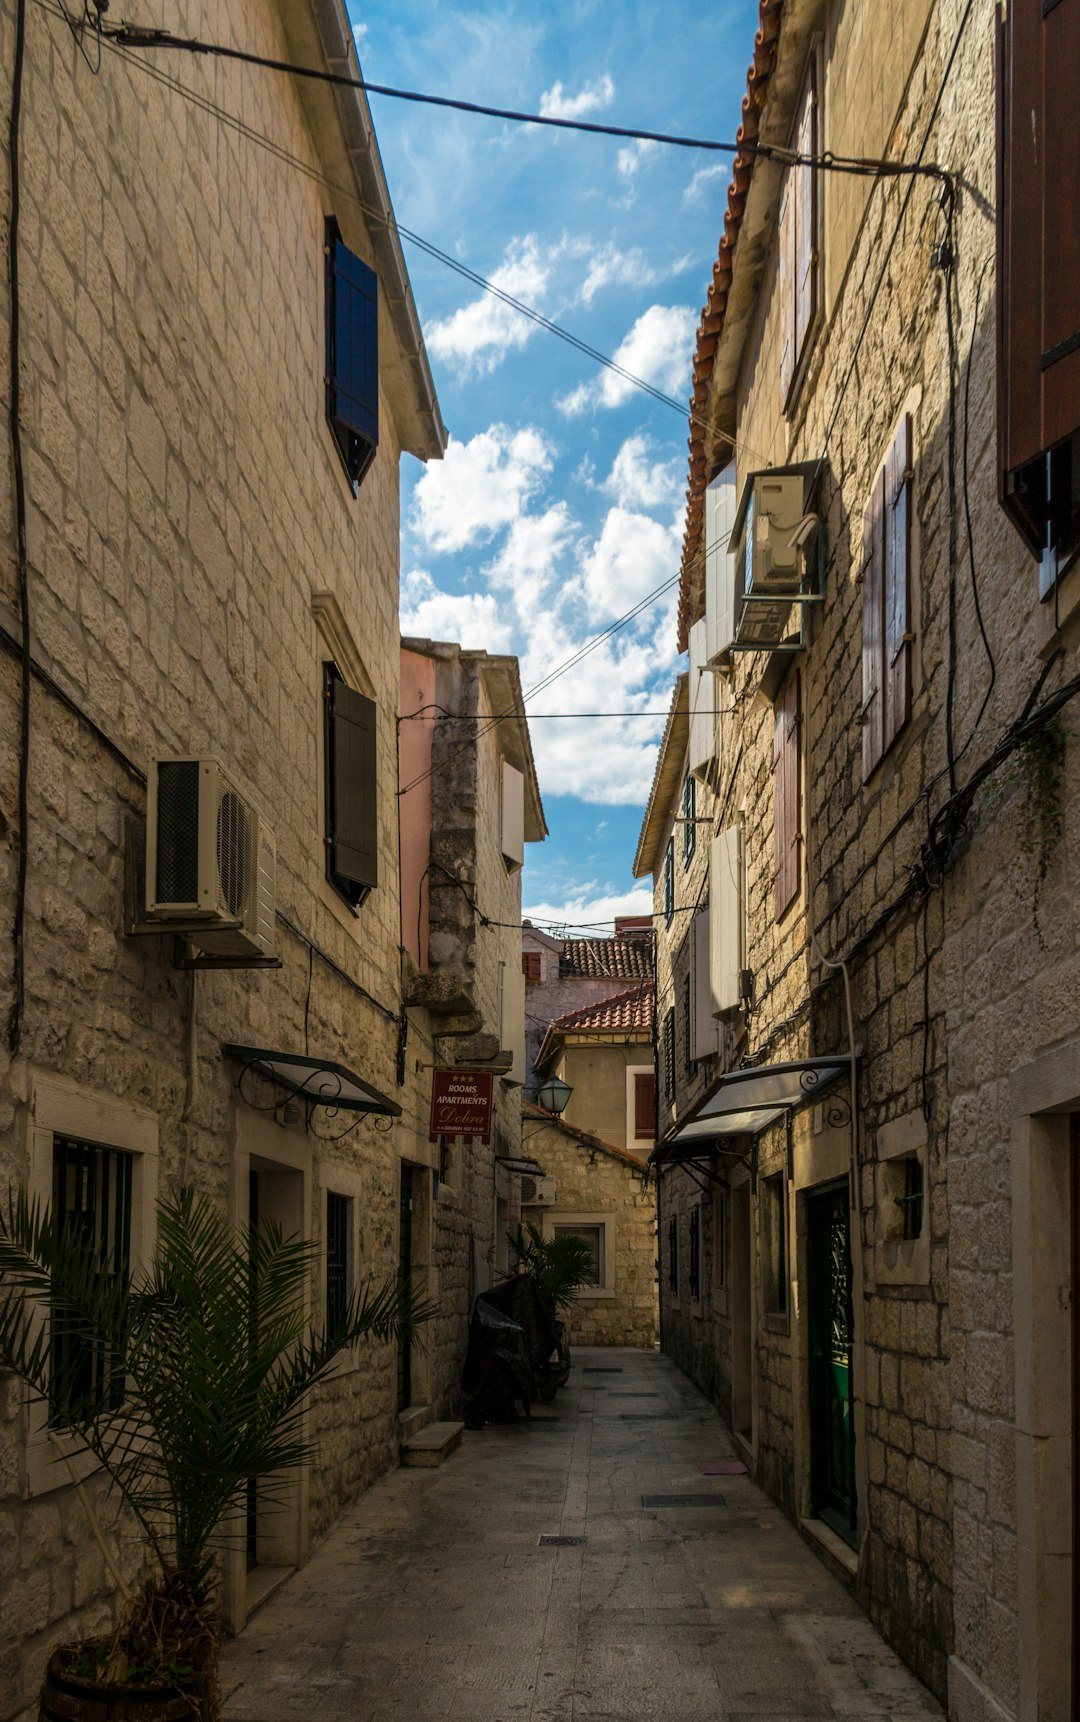 Travel Tips and Stories of Trogir in Croatia